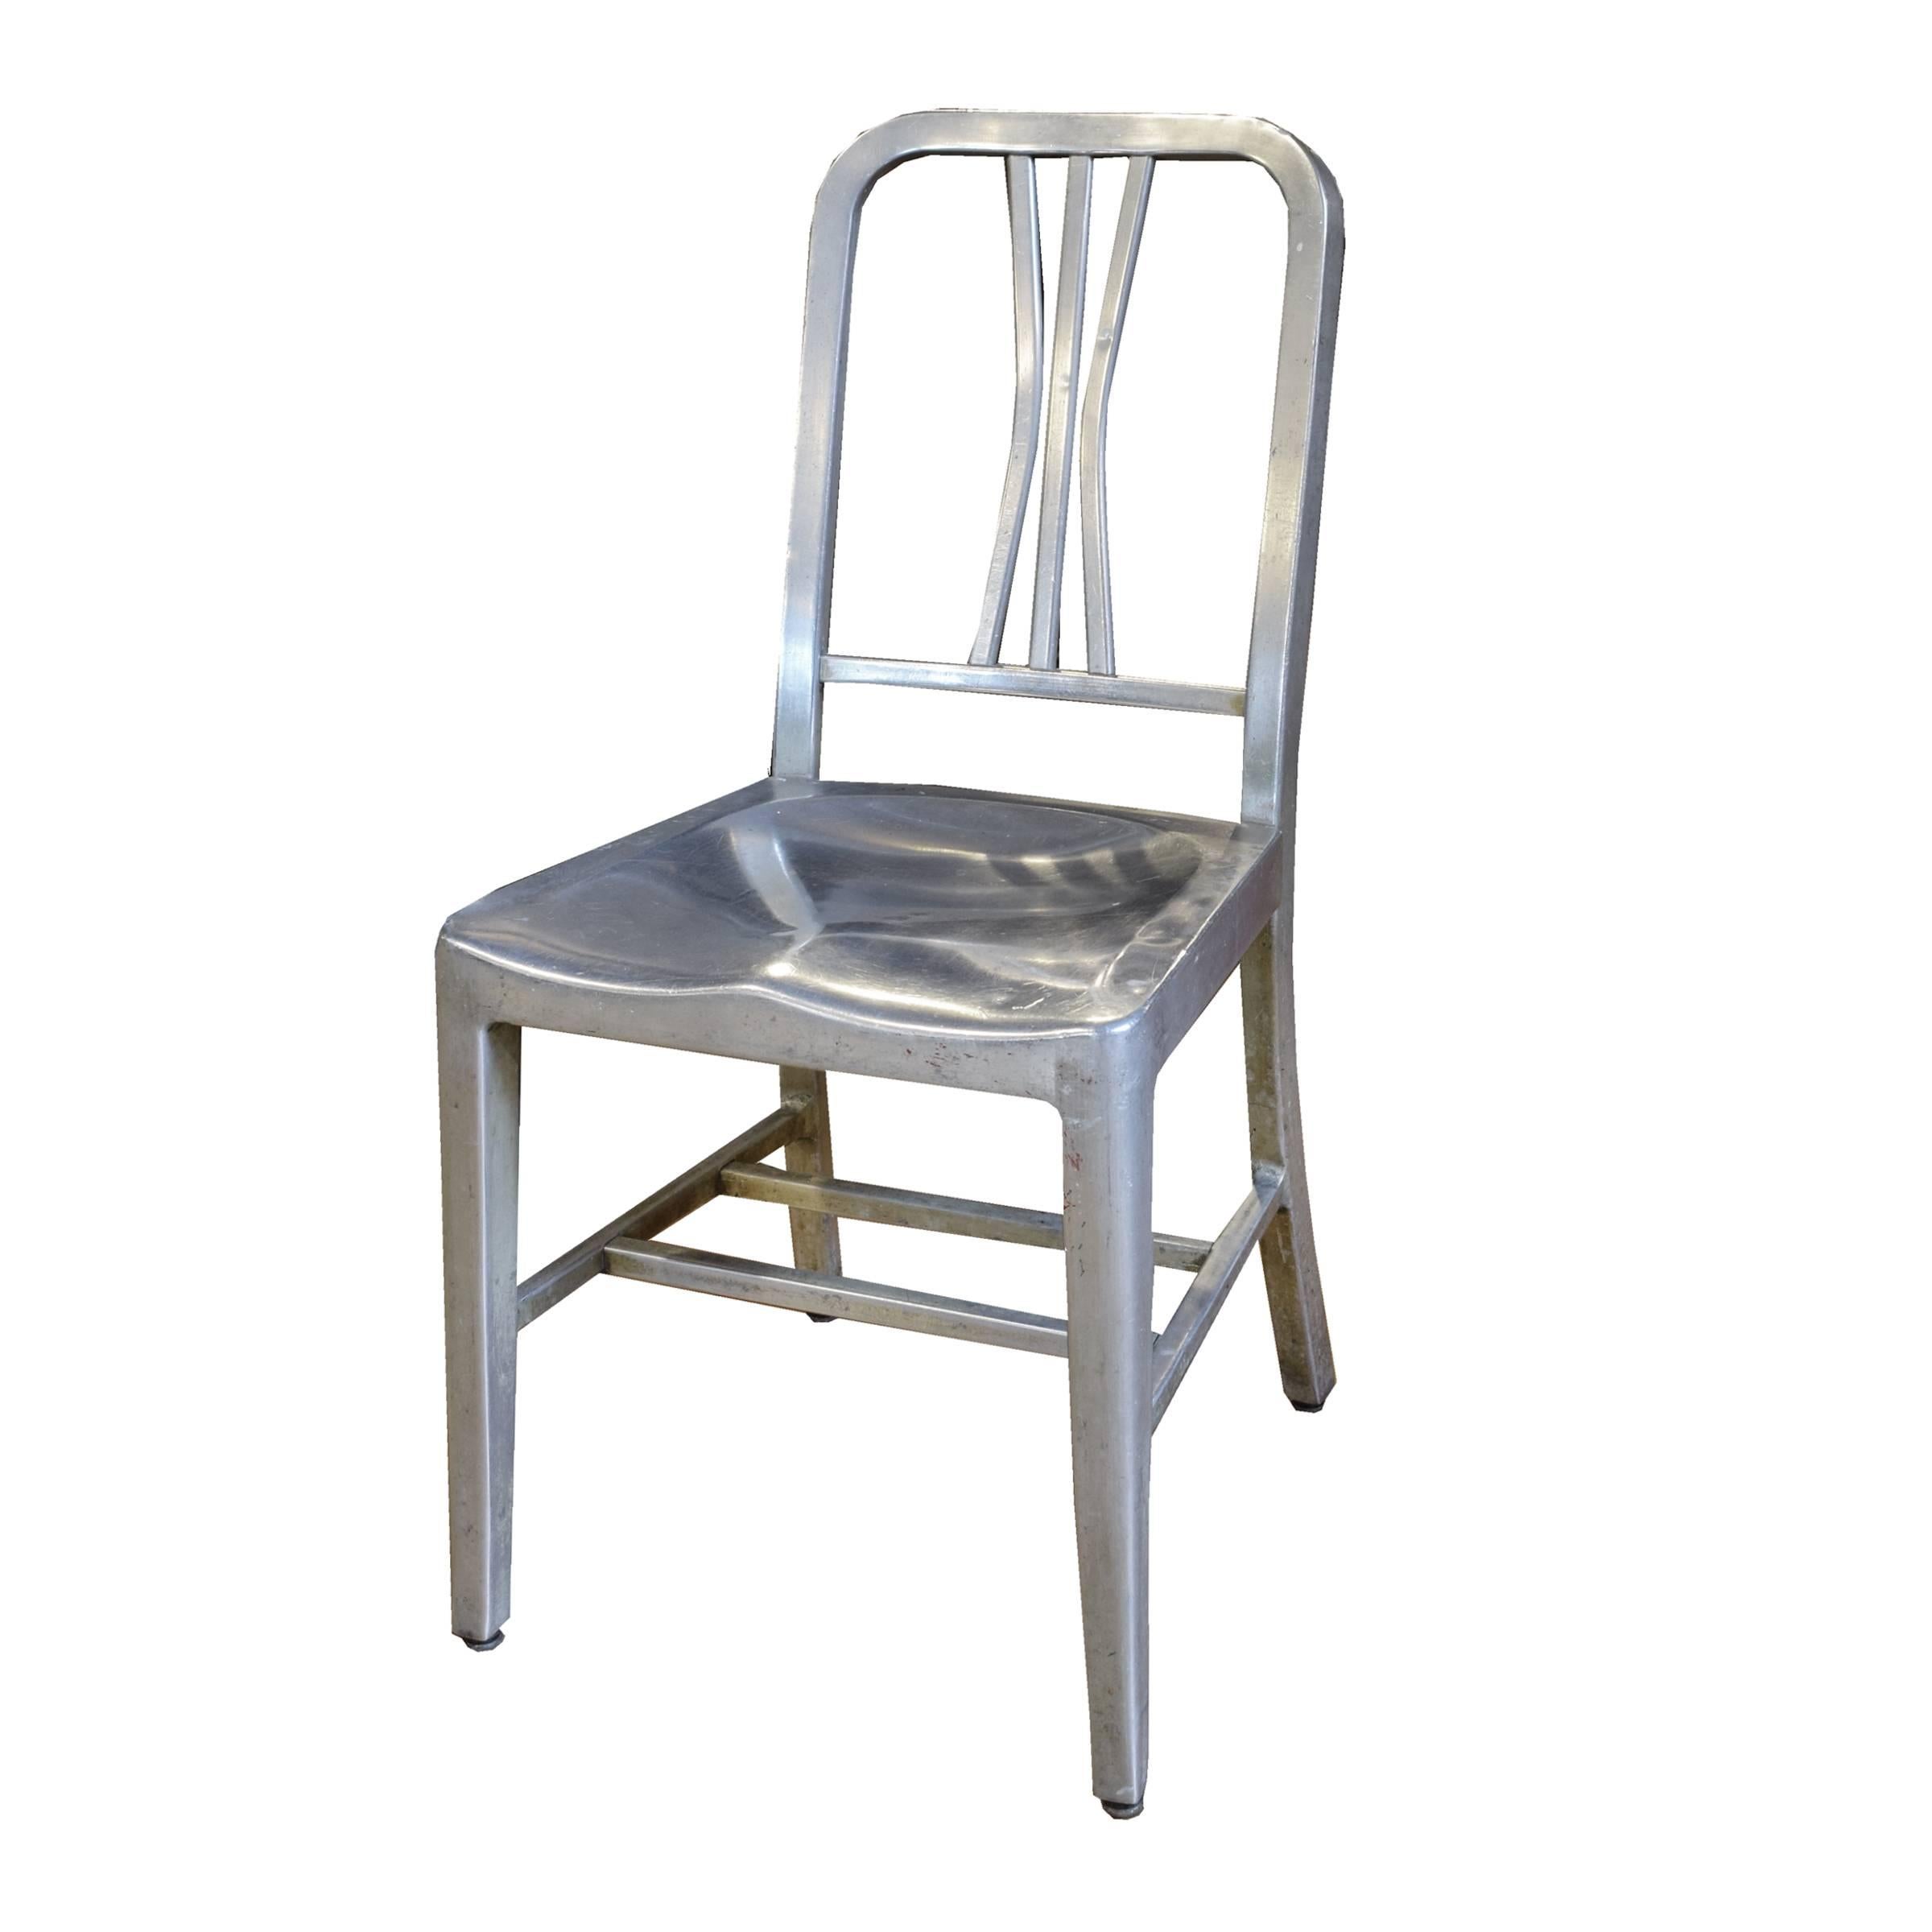 American GoodForm fireproof aluminium “Navy” chair by the General Fireproofing Company of Youngstown, Ohio, circa 1950. Originally designed in 1944 for use on submarines for the U.S Navy, the “Navy” chair has been in production ever since. Many